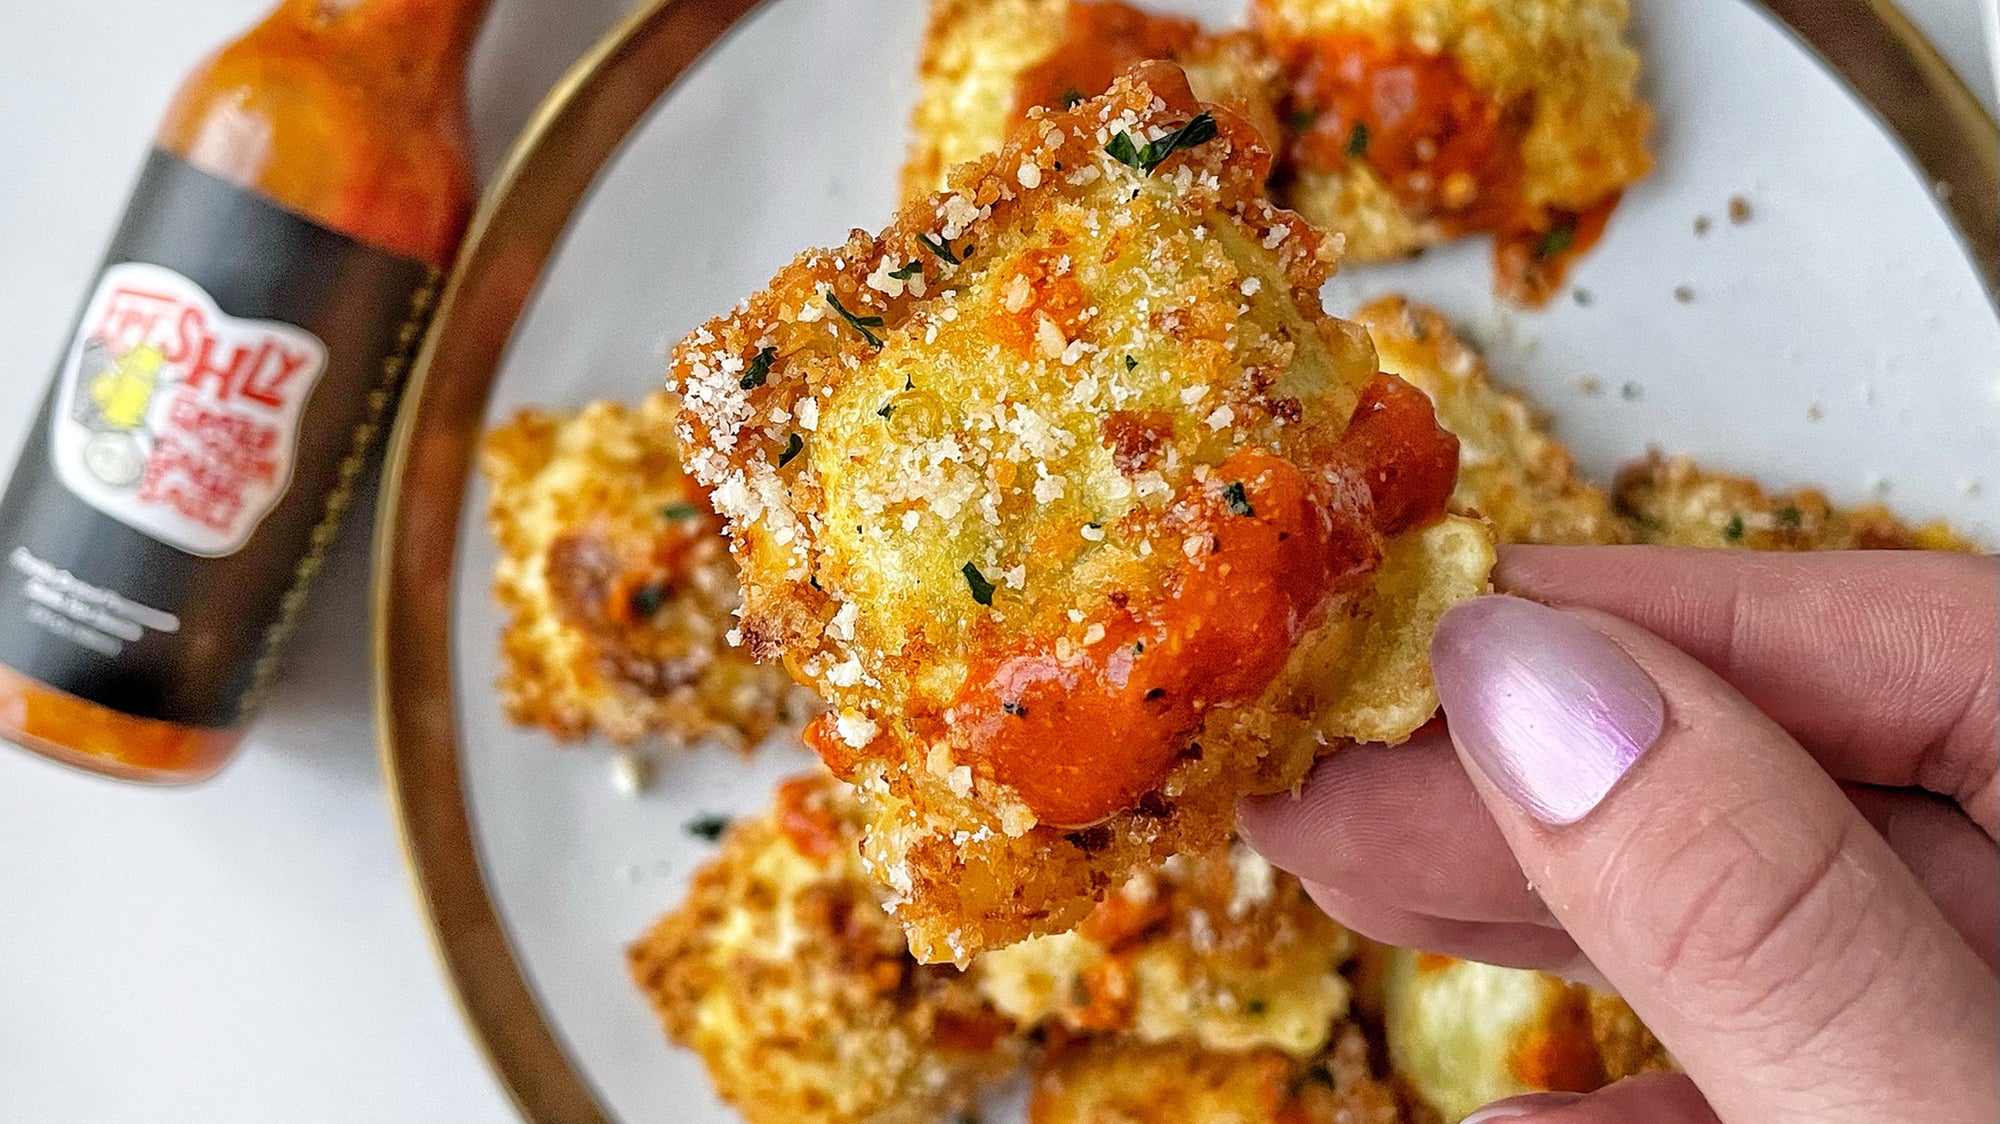 Spicy Fried Ravioli with Freshly Grated Parm Garlic Sauce